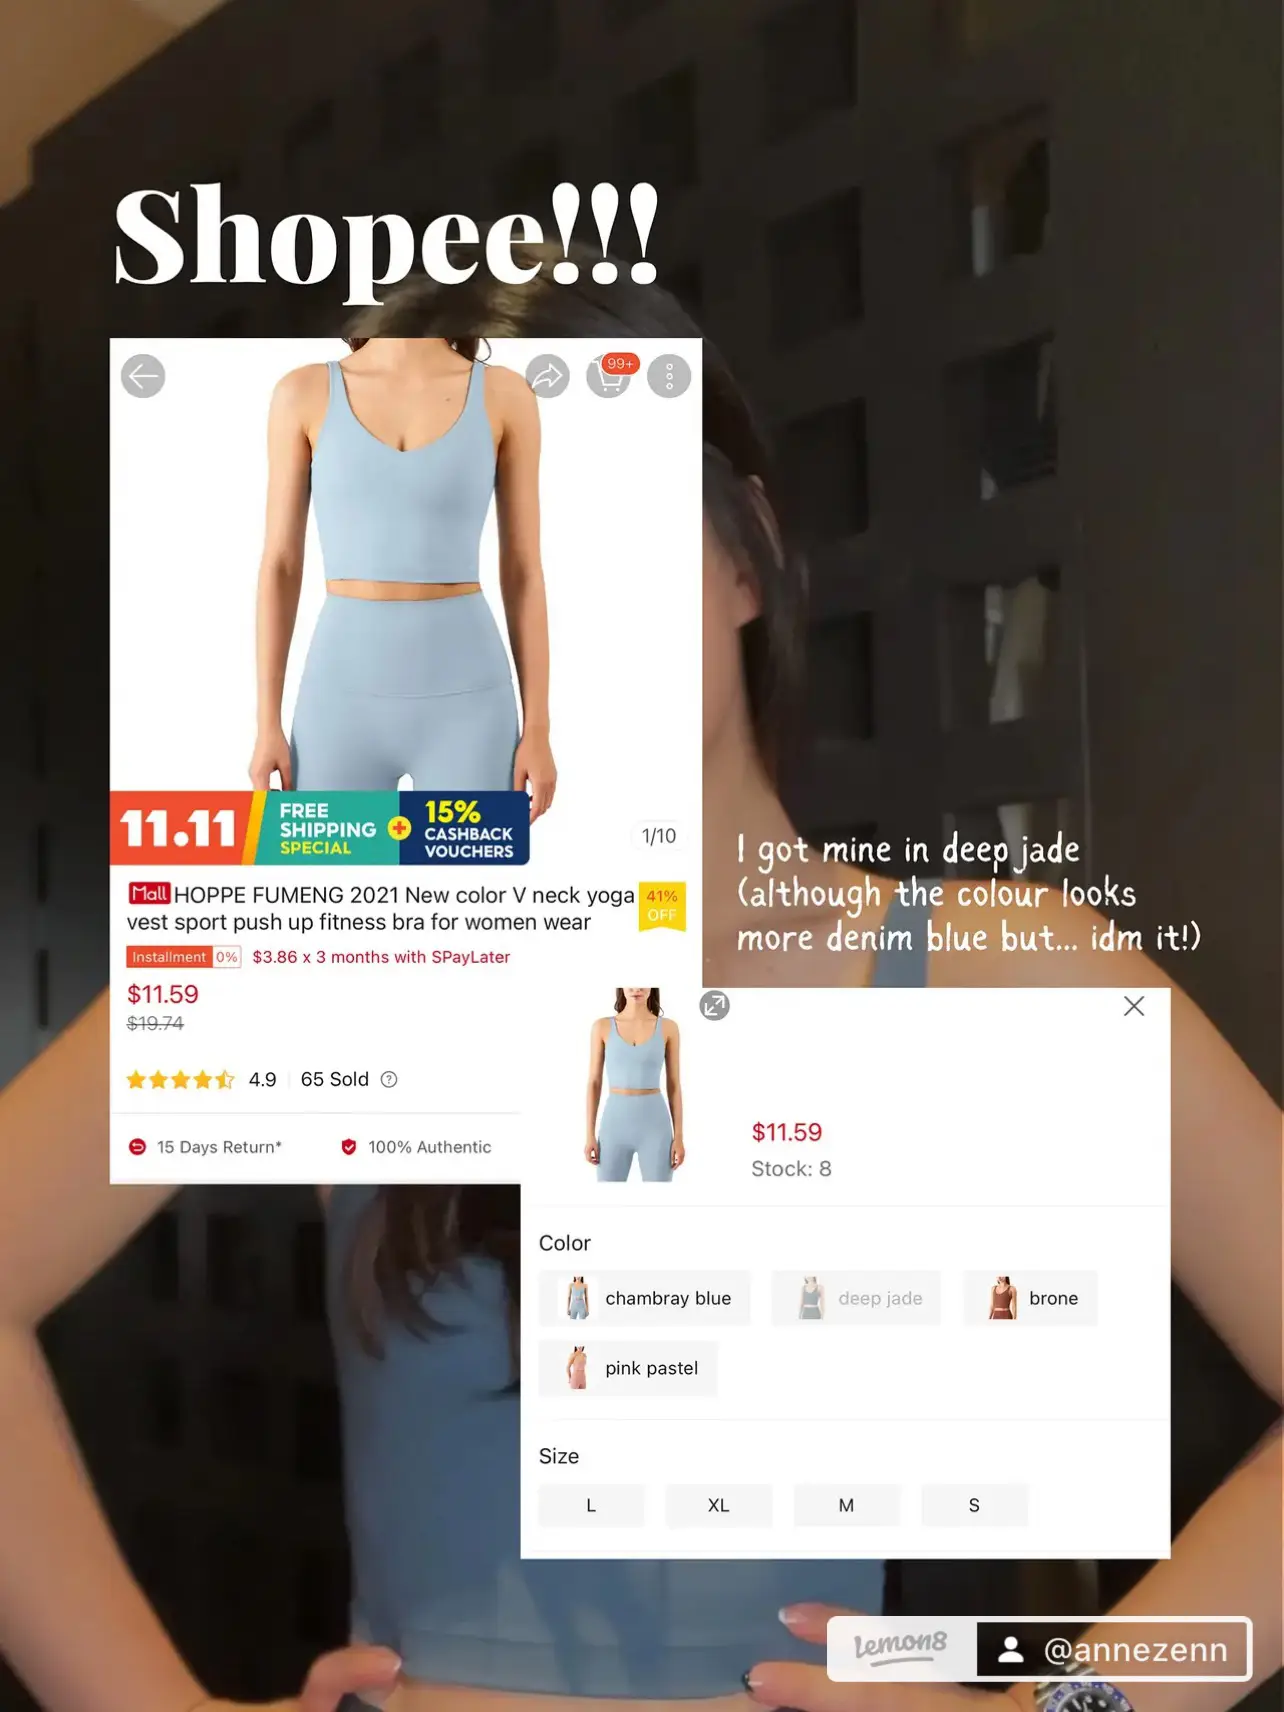 FOUND! Lululemon softstreme shorts dupe!, Video published by Claire Tee